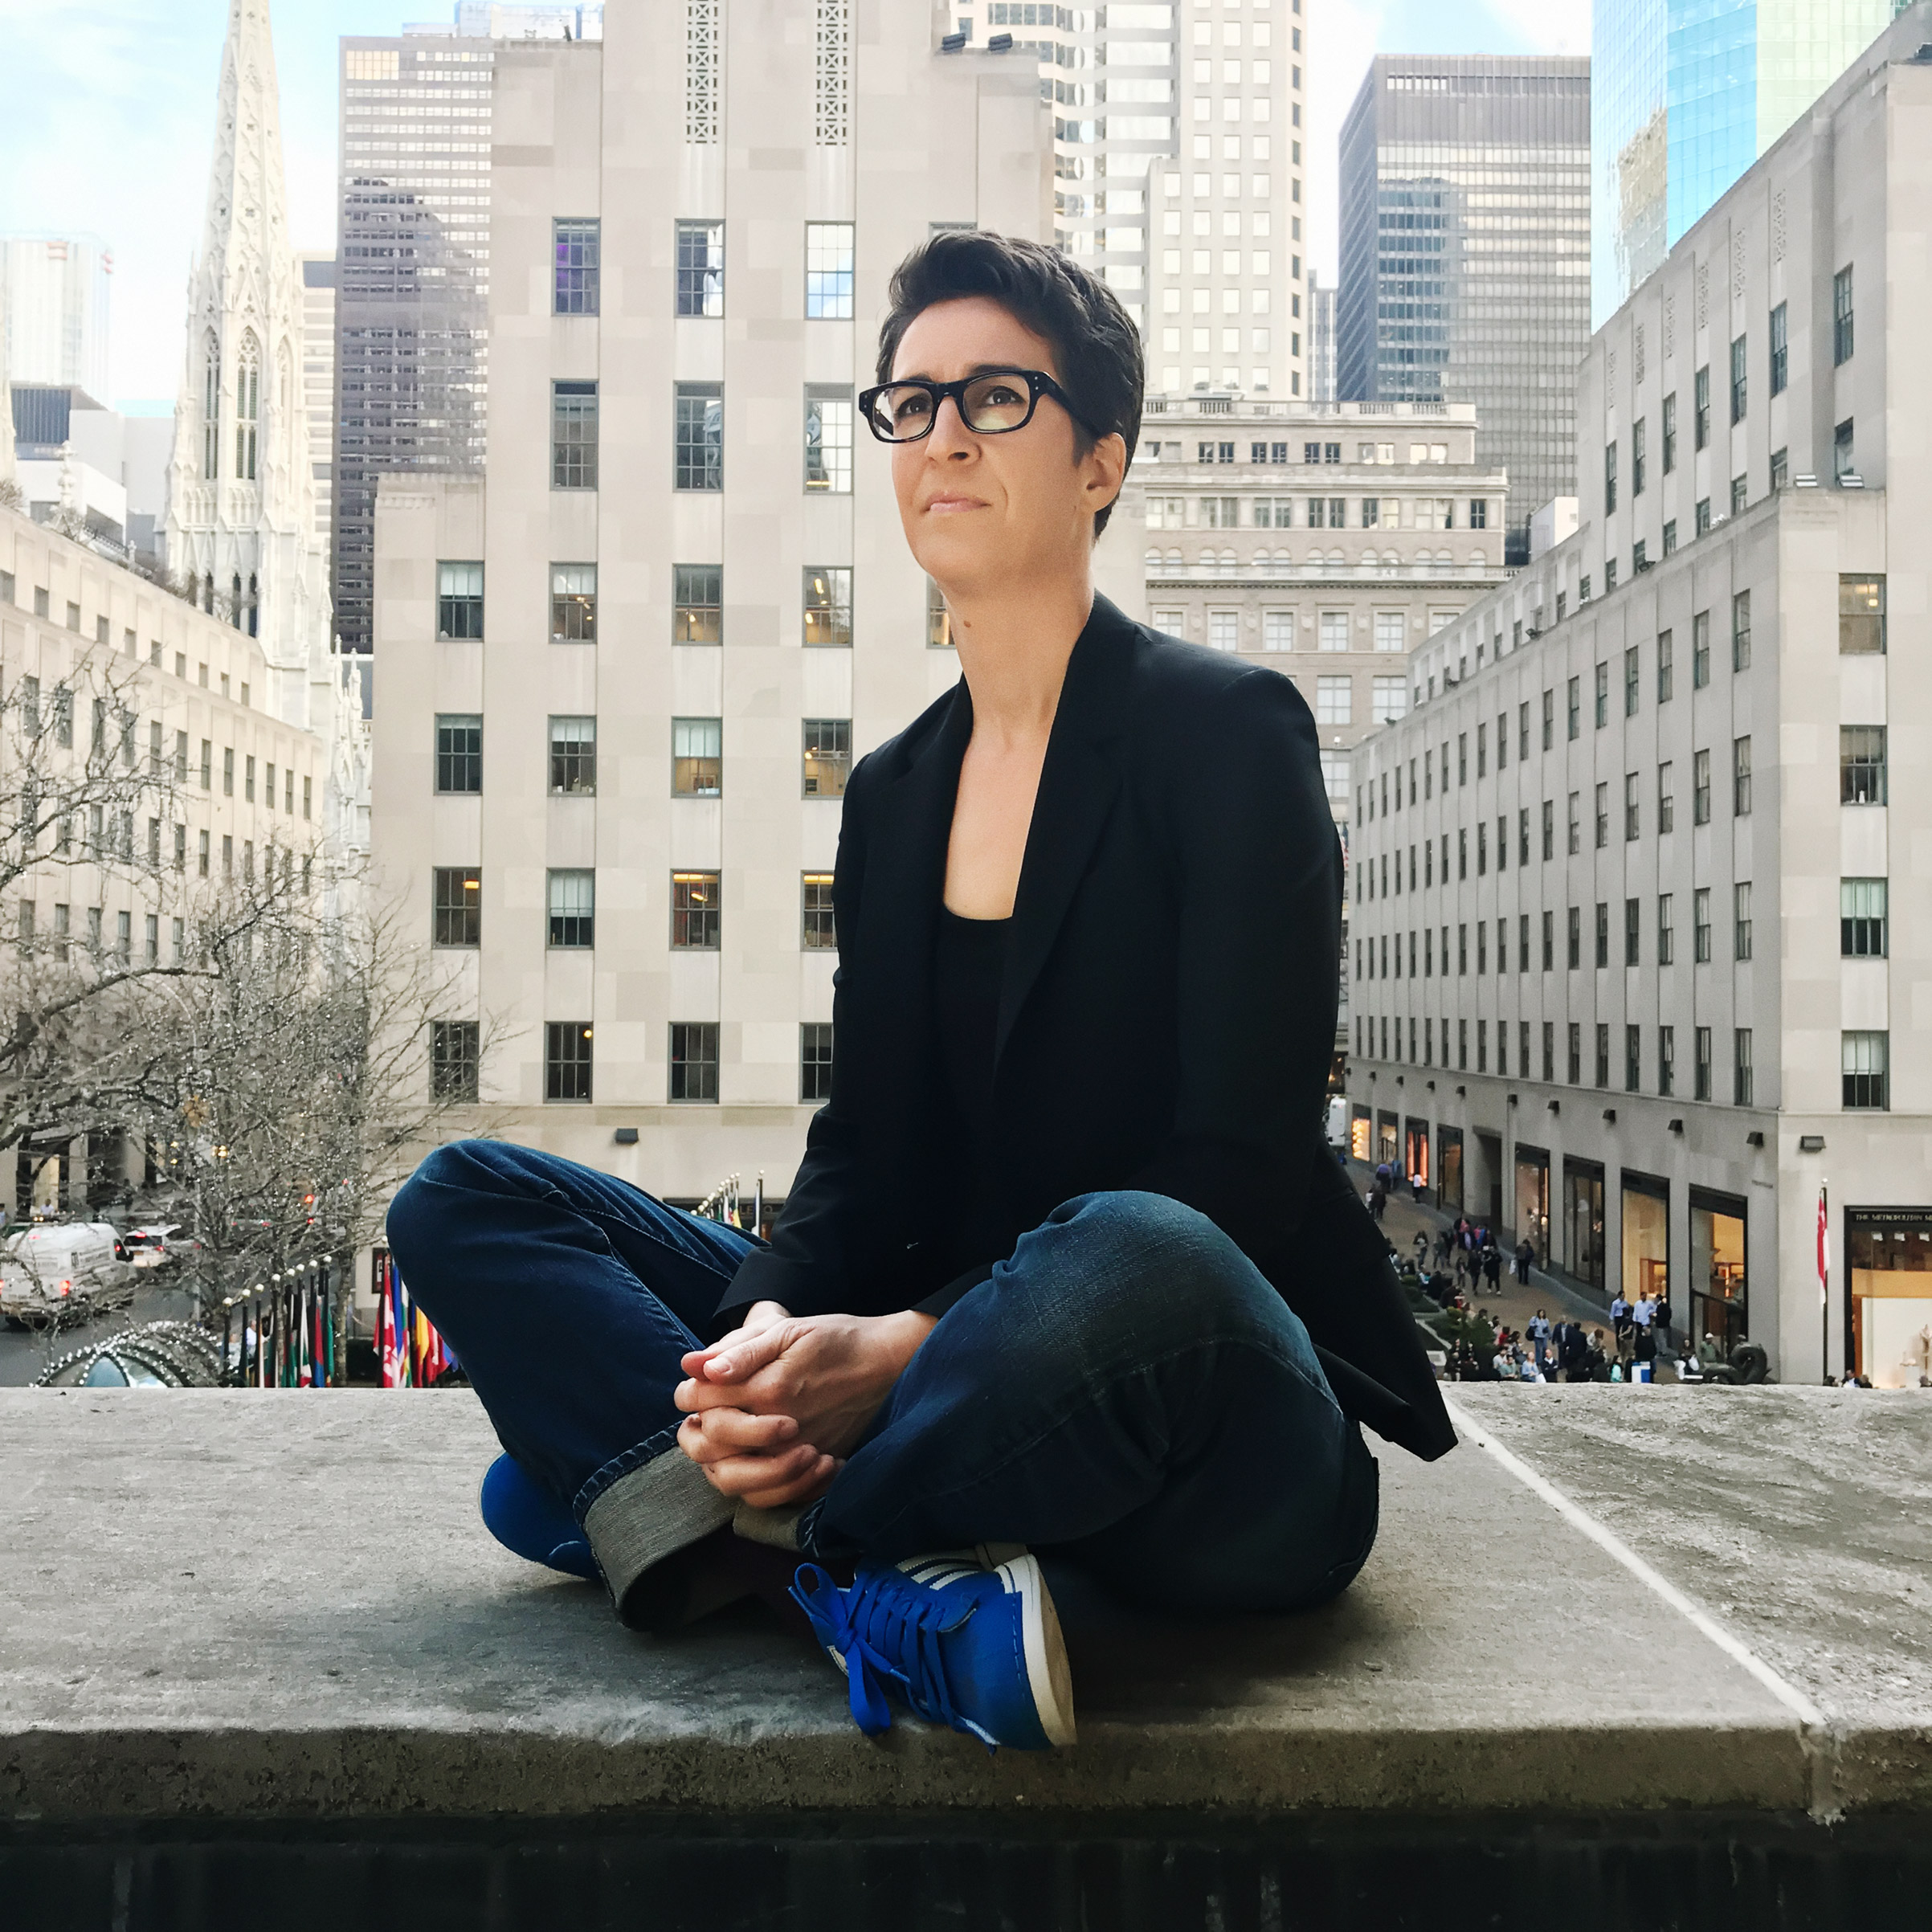 Portrait of Rachel Maddow, photographed at the Rockefeller Plaza, NYC, on February 24, 2017. (Photograph by Luisa Dörr for TIME)